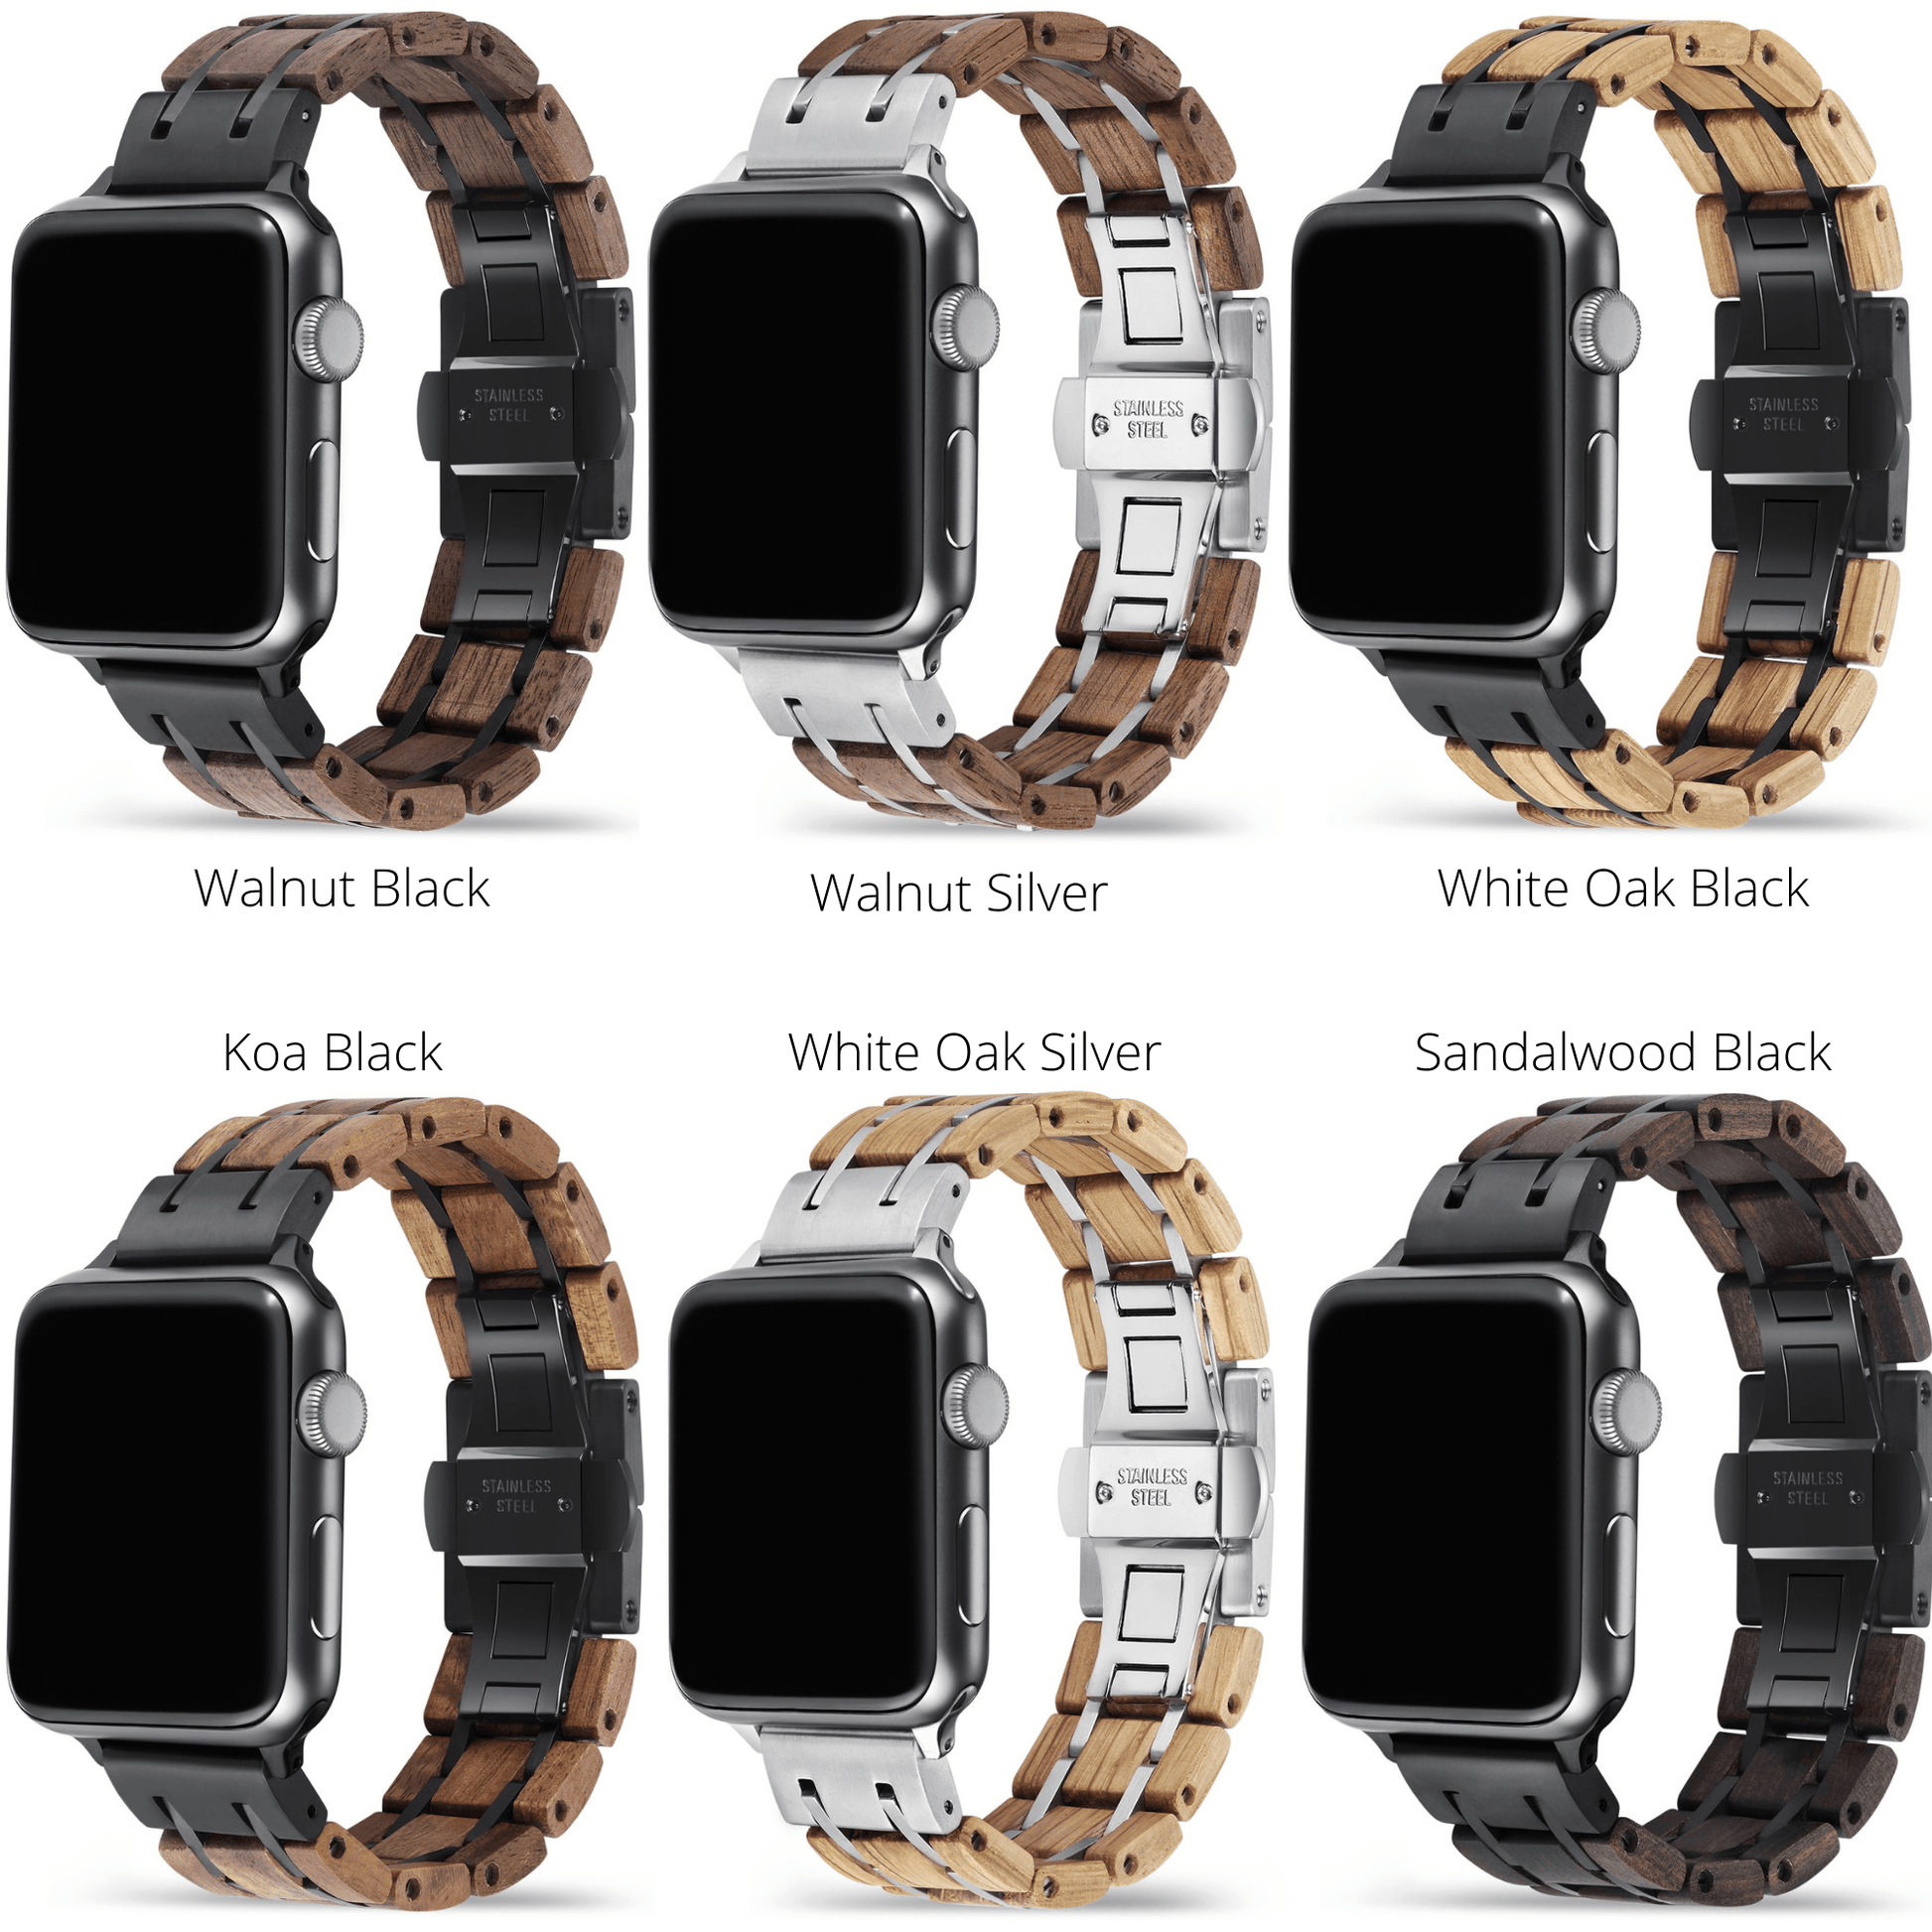 White Oak Silver Apple Watch Band 🌳 Natural Wood. ♻️ Eco-friendly. ✈️ Free Worldwide Shipping. 🎁 Perfect Gift.